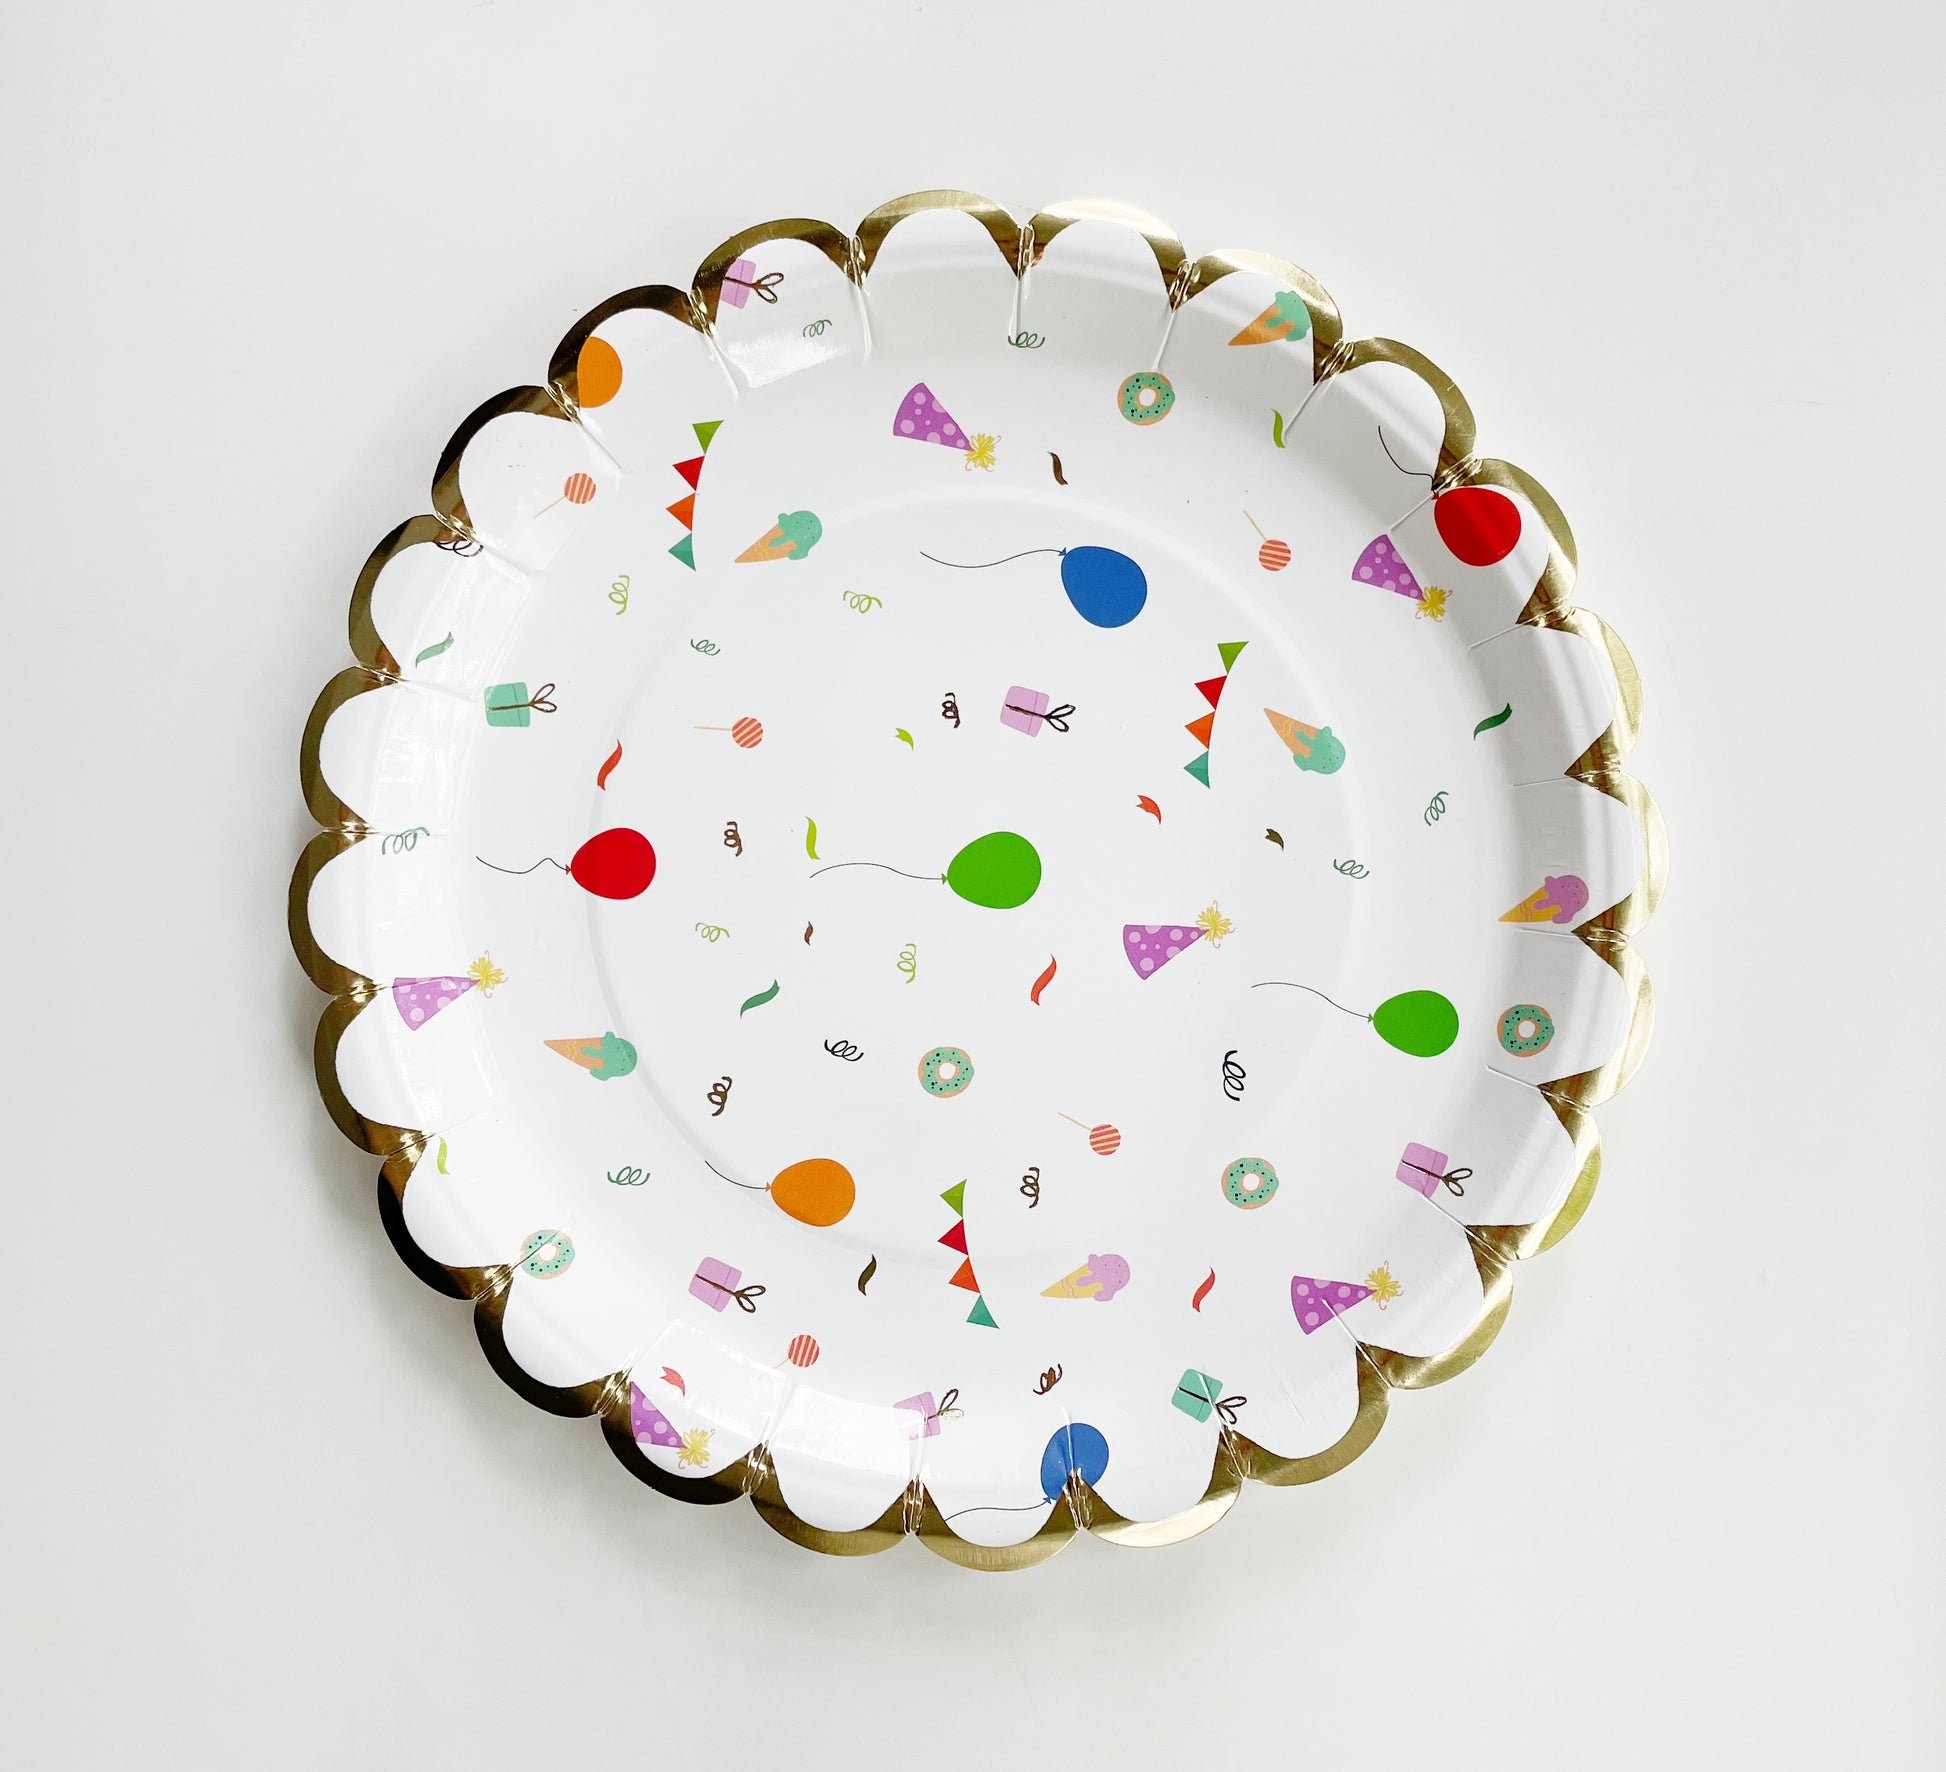 The small Celebration paper party plates have a gold foil scalloped edge. The celebration pattern features green, orange and blue balloons, ice cream cones, party hats, party garlands, birthday gifts and donuts.